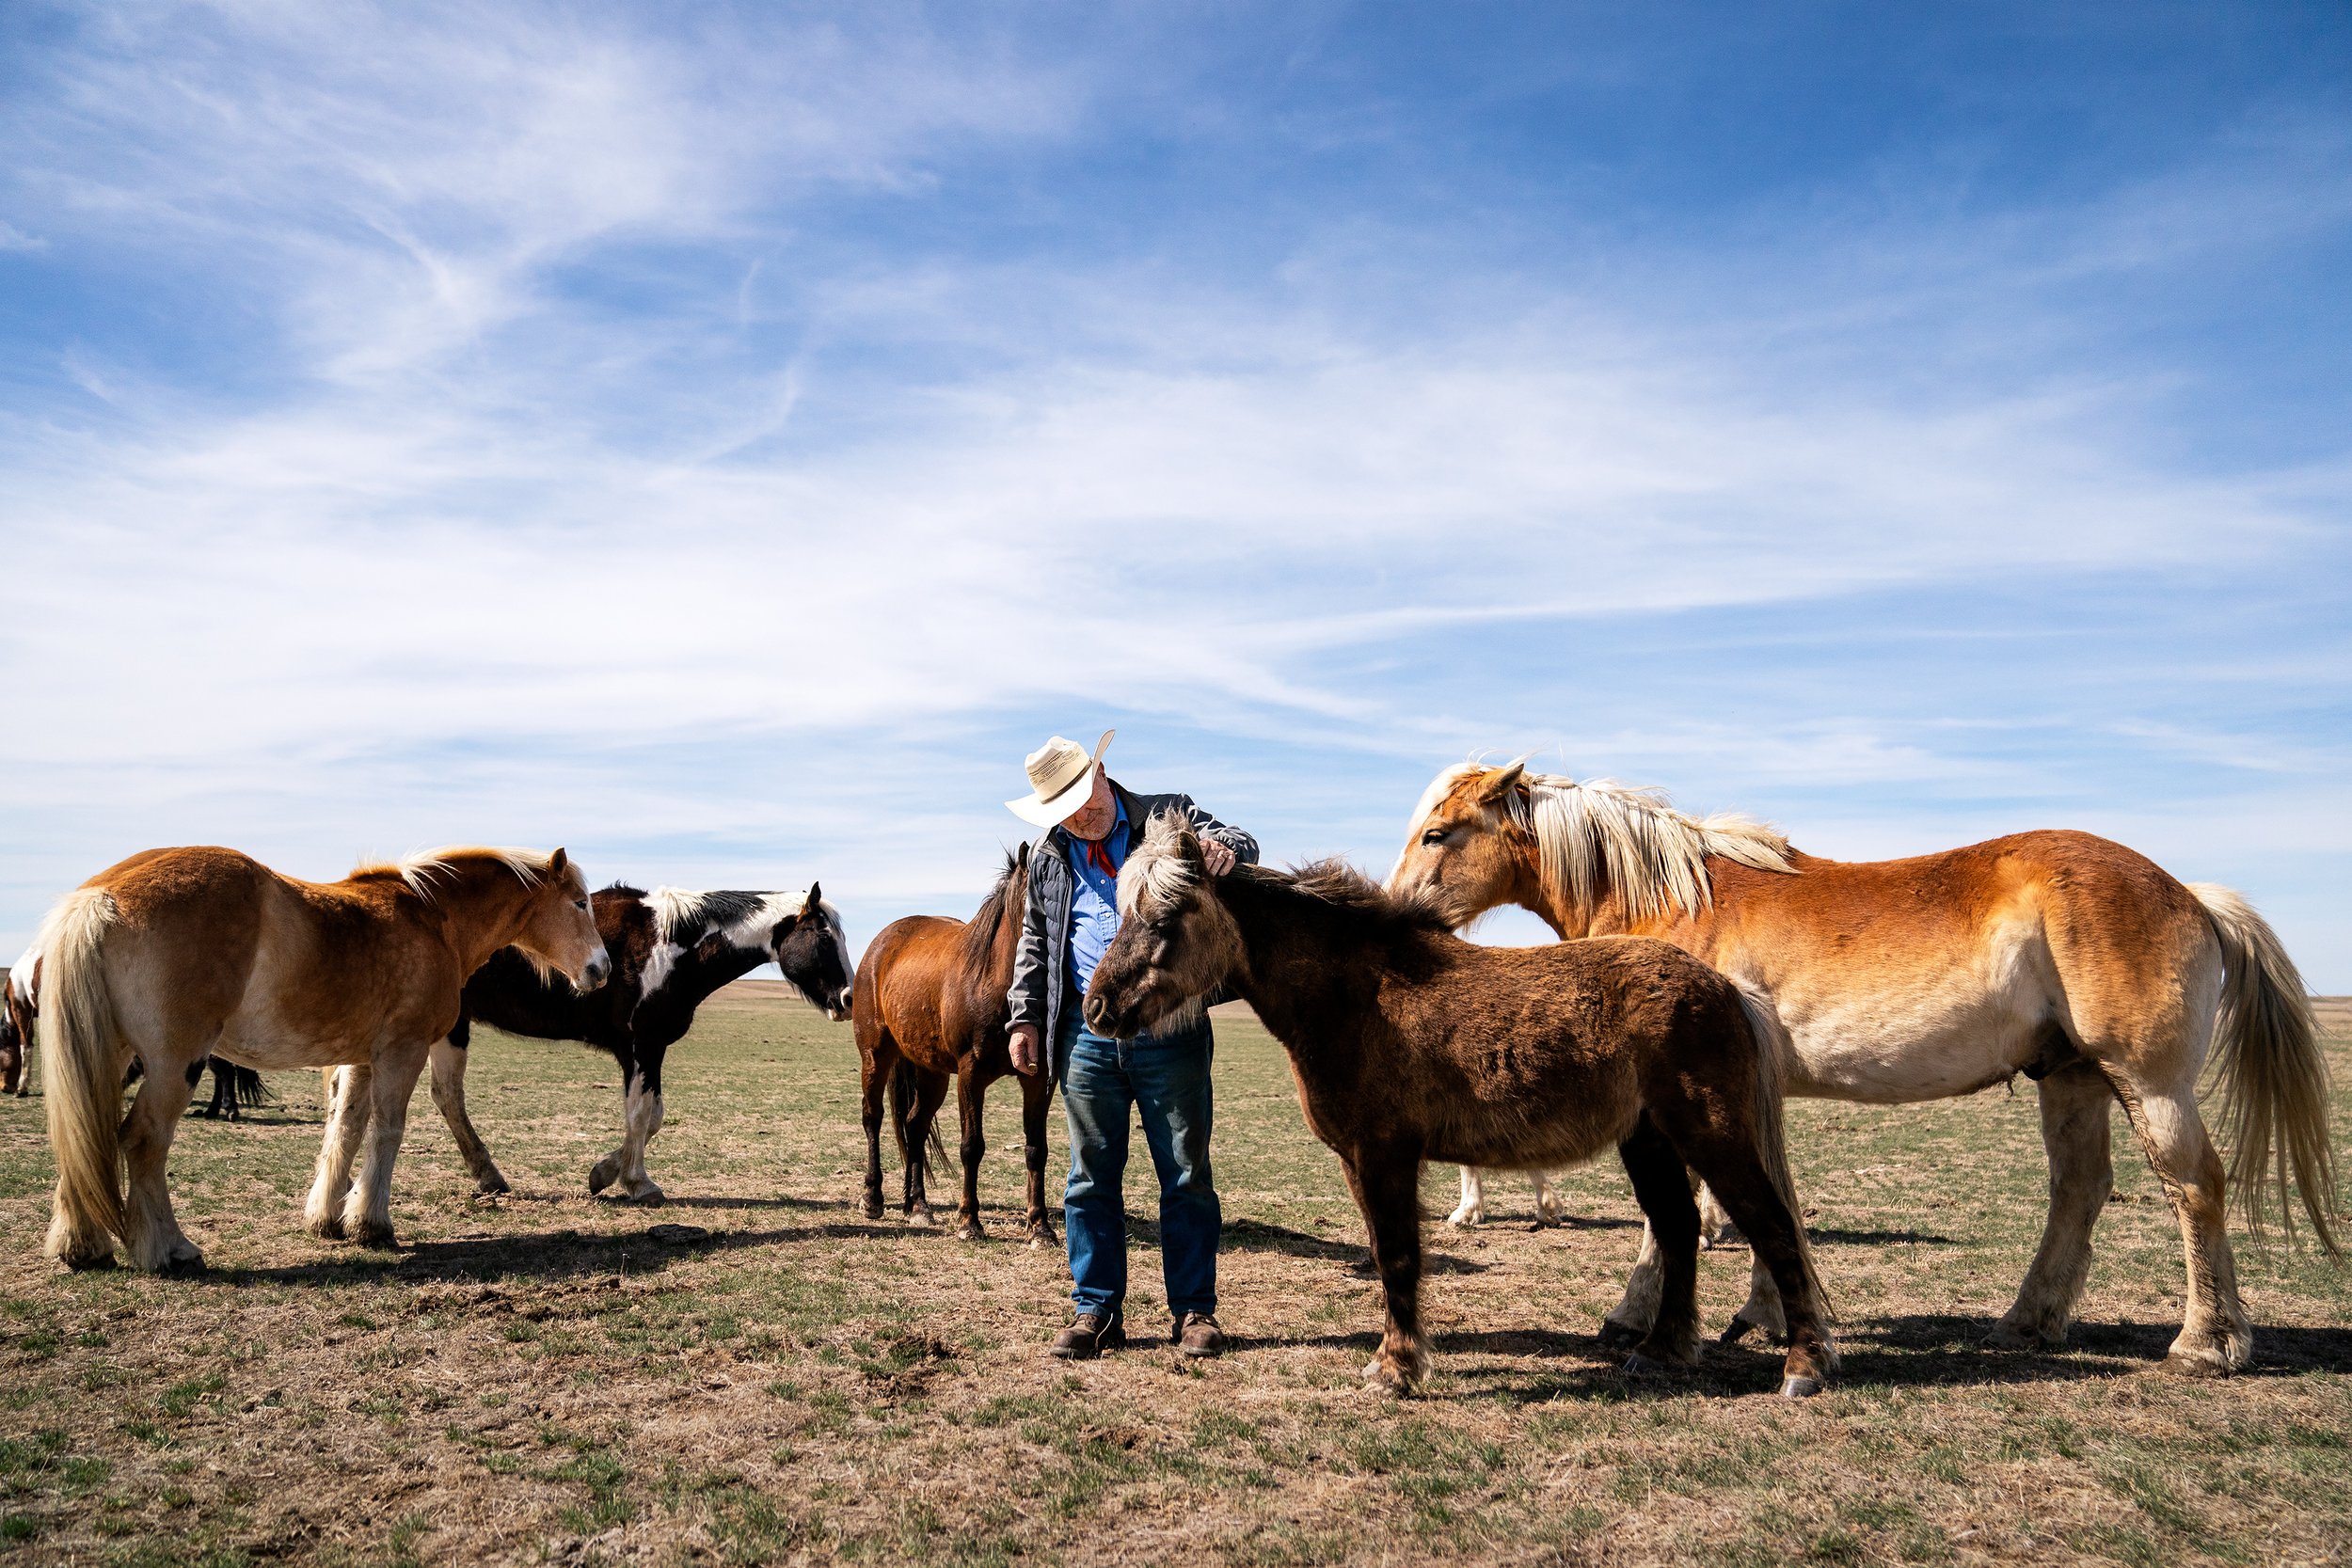  Link to Story:  The nuclear missile next door    Ed Butcher visits horses in a field miles from a silo housing a nuclear-armed Minuteman III intercontinental ballistic missile on his ranch in Fergus County, Mont.  